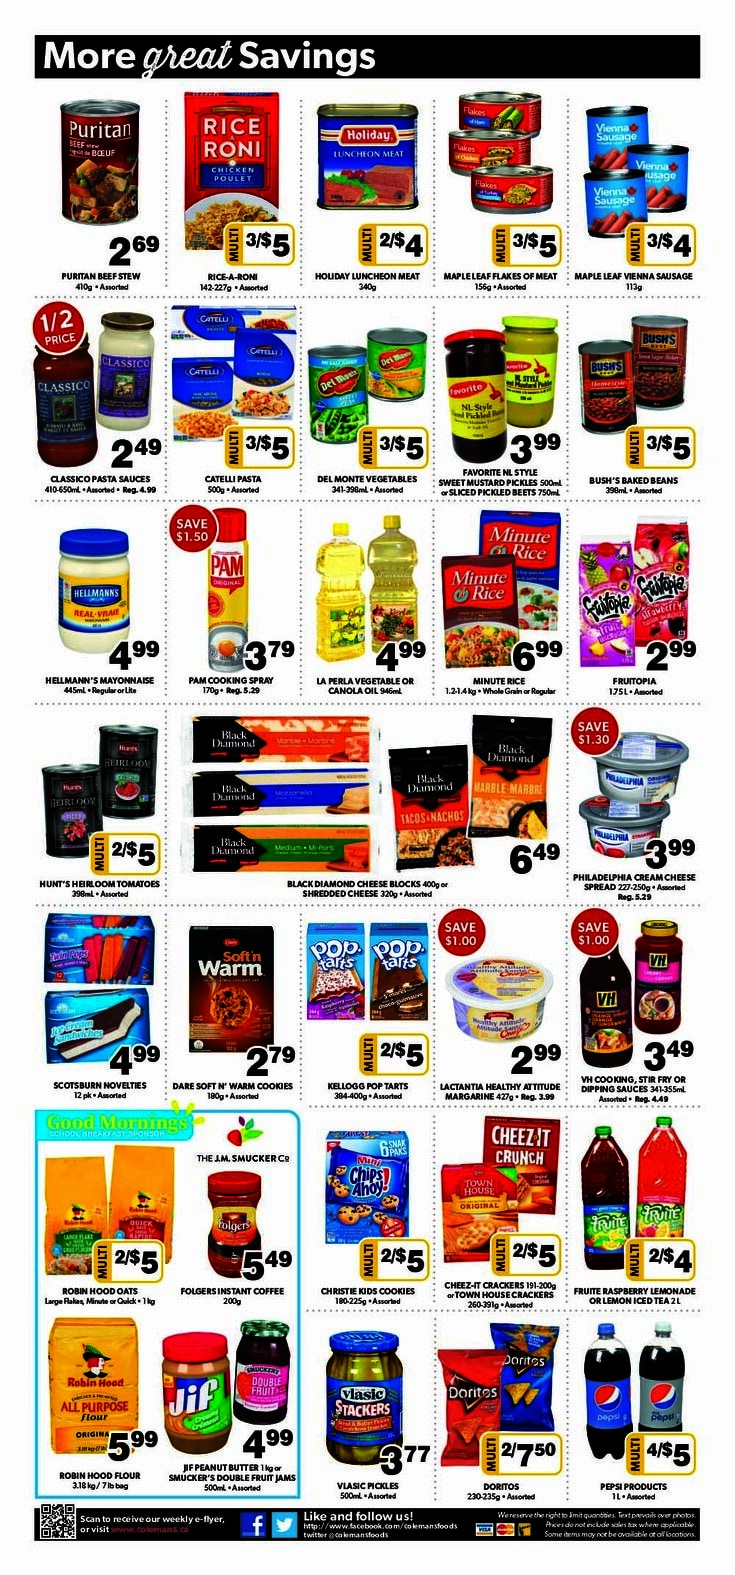 Colemans - Weekly Flyer Specials - Page 6